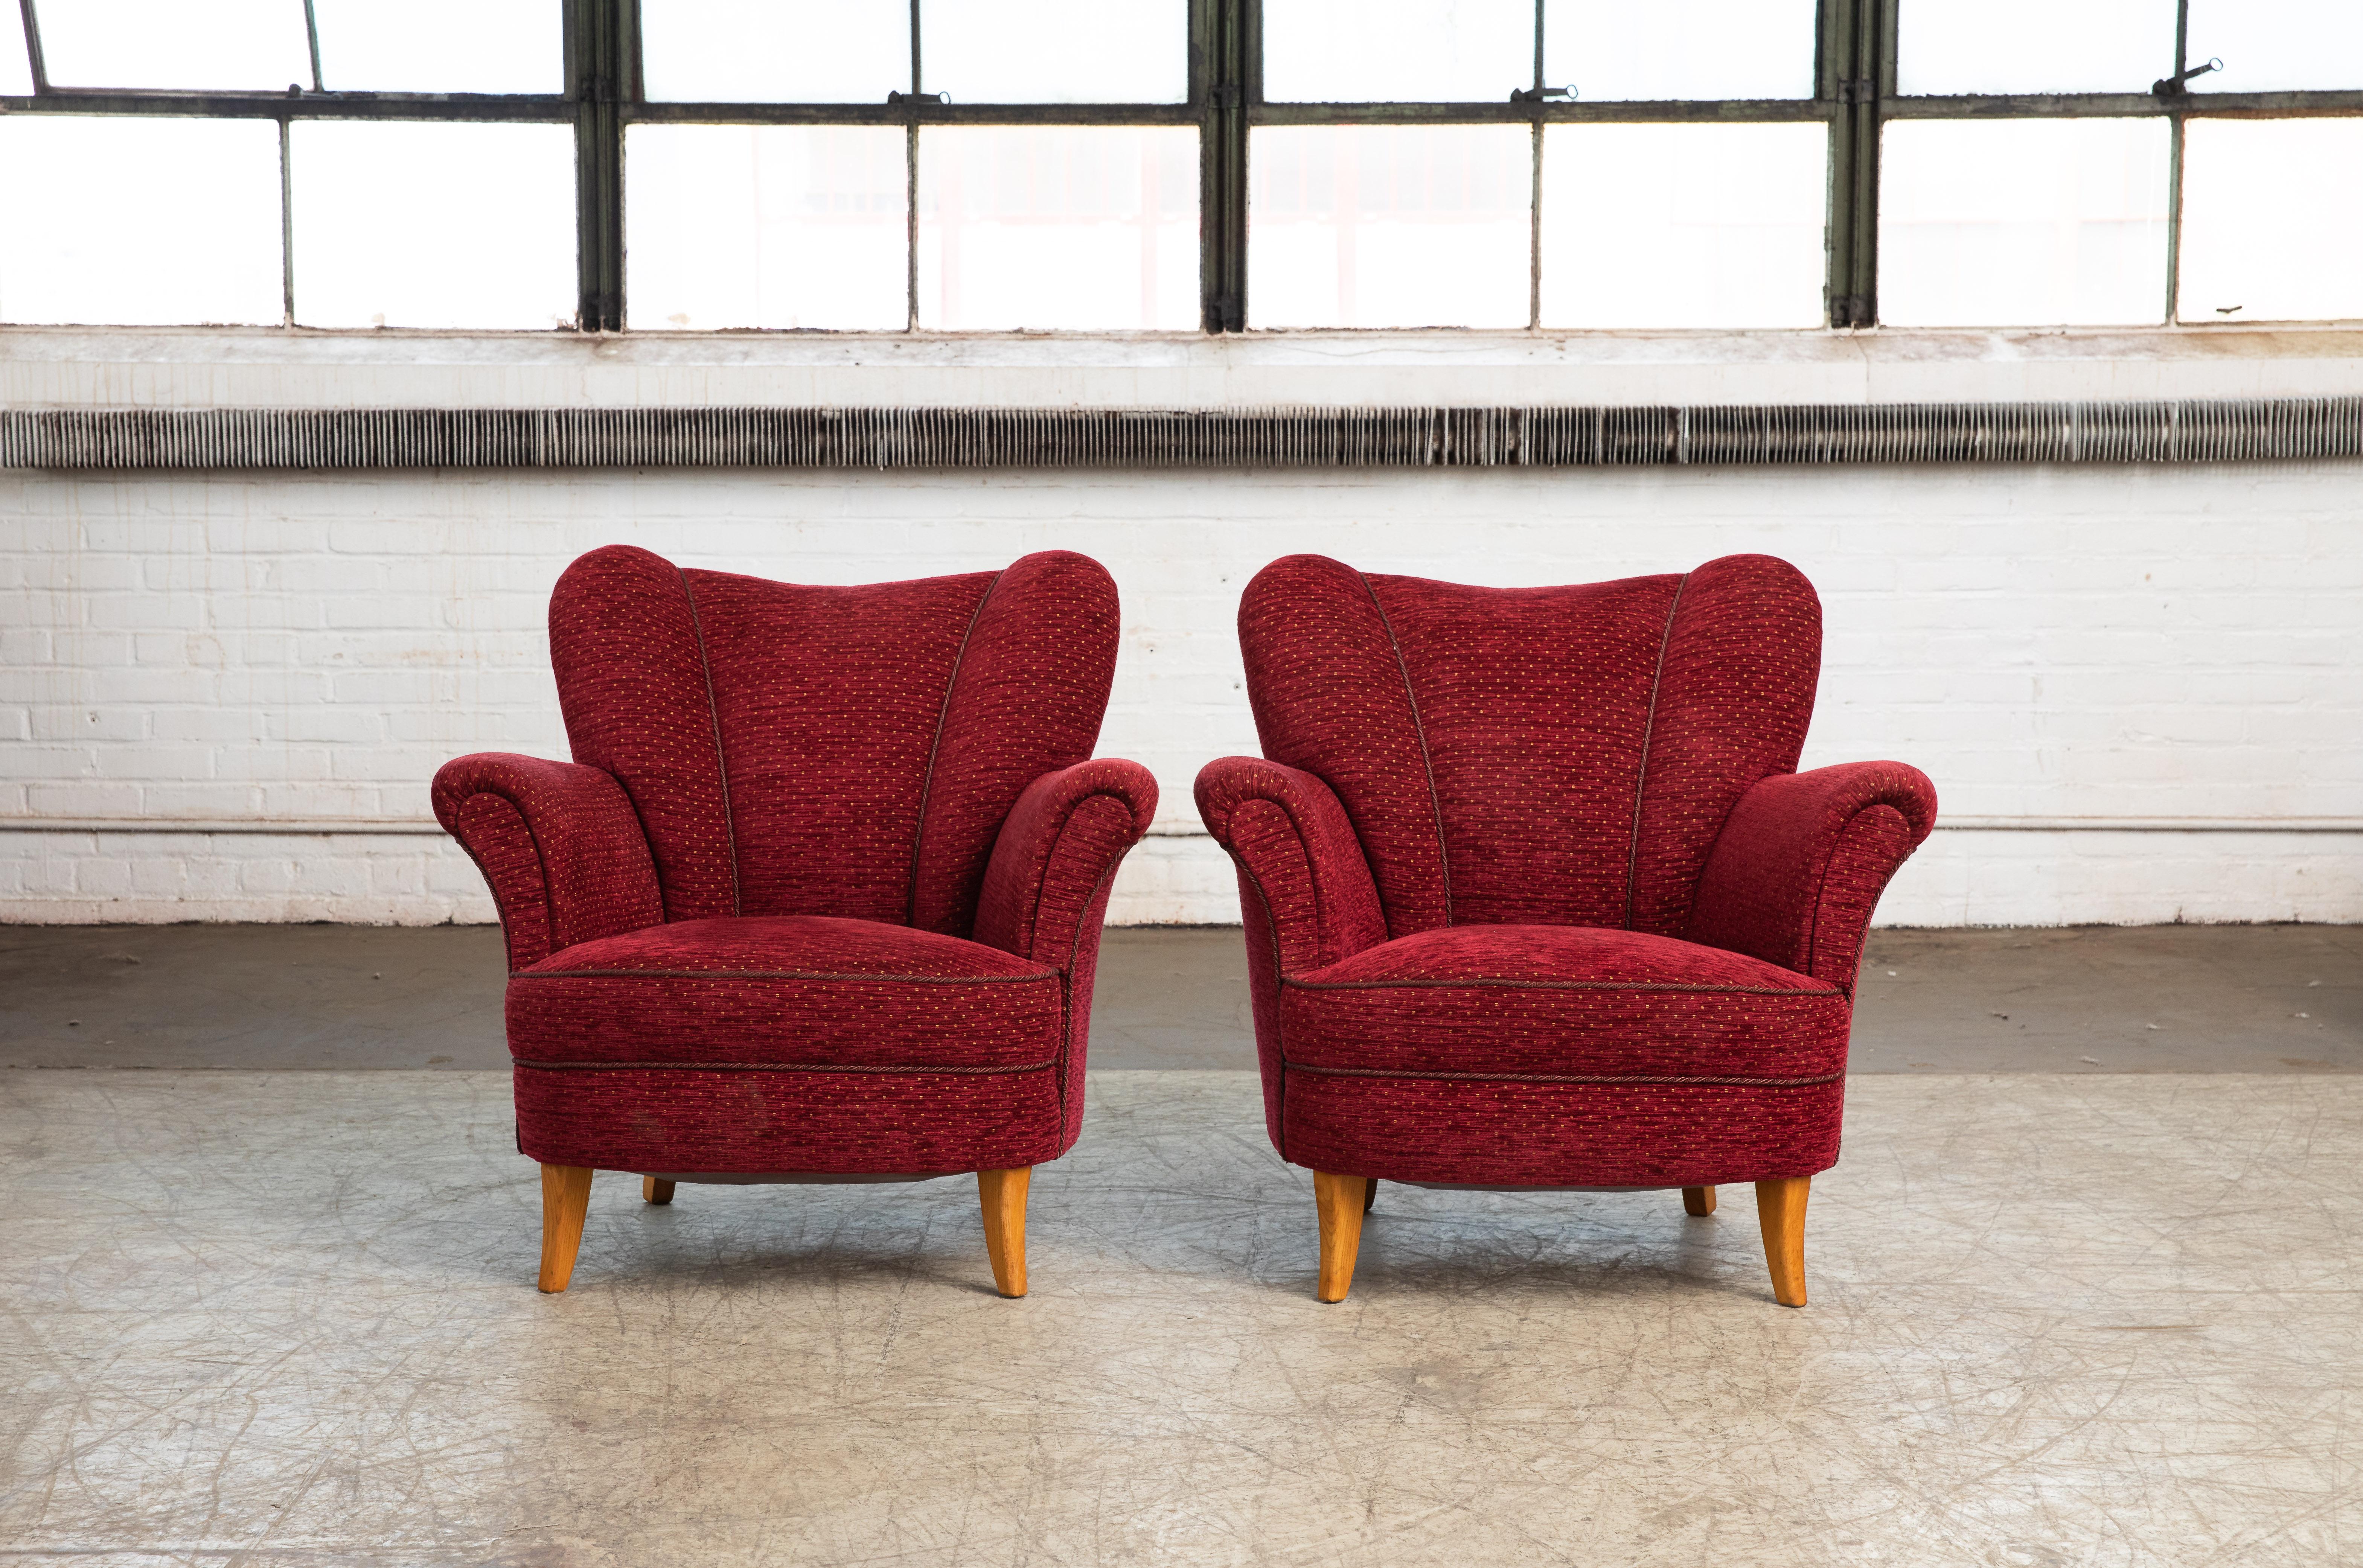 Beautiful pair of 1940s Scandinavian easy chairs in the style of Finnish Design Icon, Carl-Johan Boman. Very elegant with their distinct shape, precise lines and harmonious proportions. While we found these chairs in Denmark the style is more